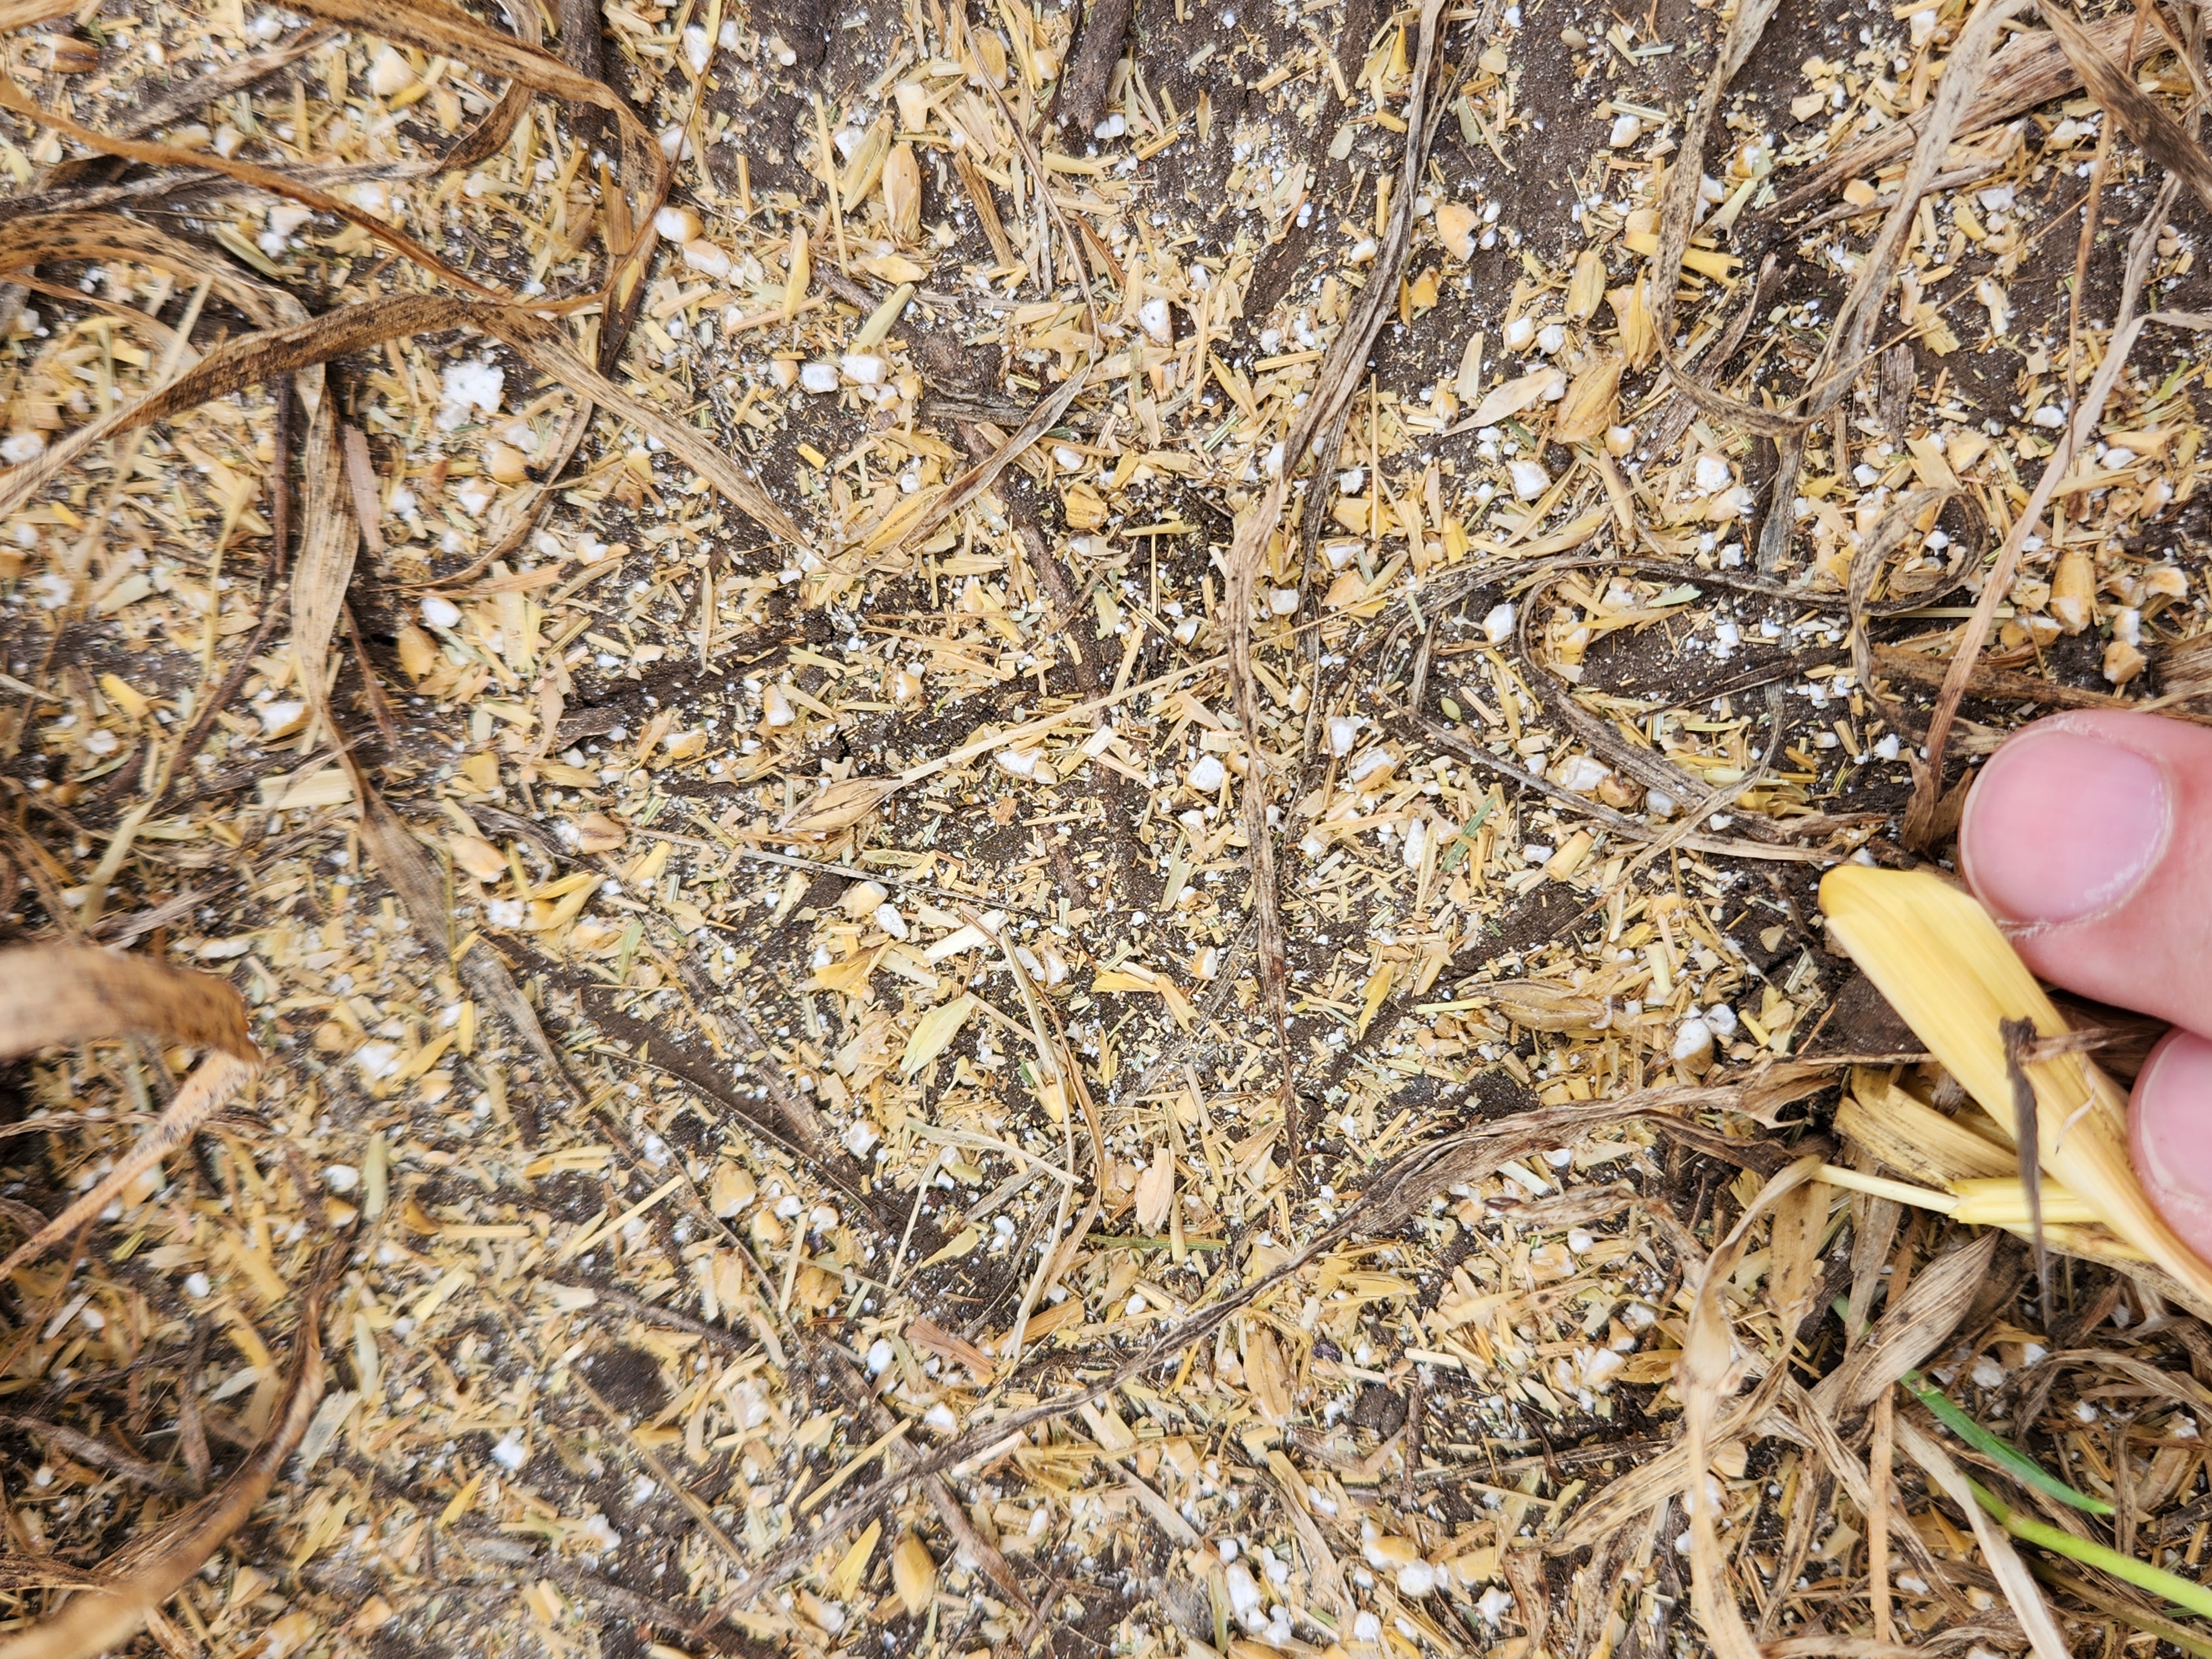 Crushed and cracked weed seeds in harvest chaff.